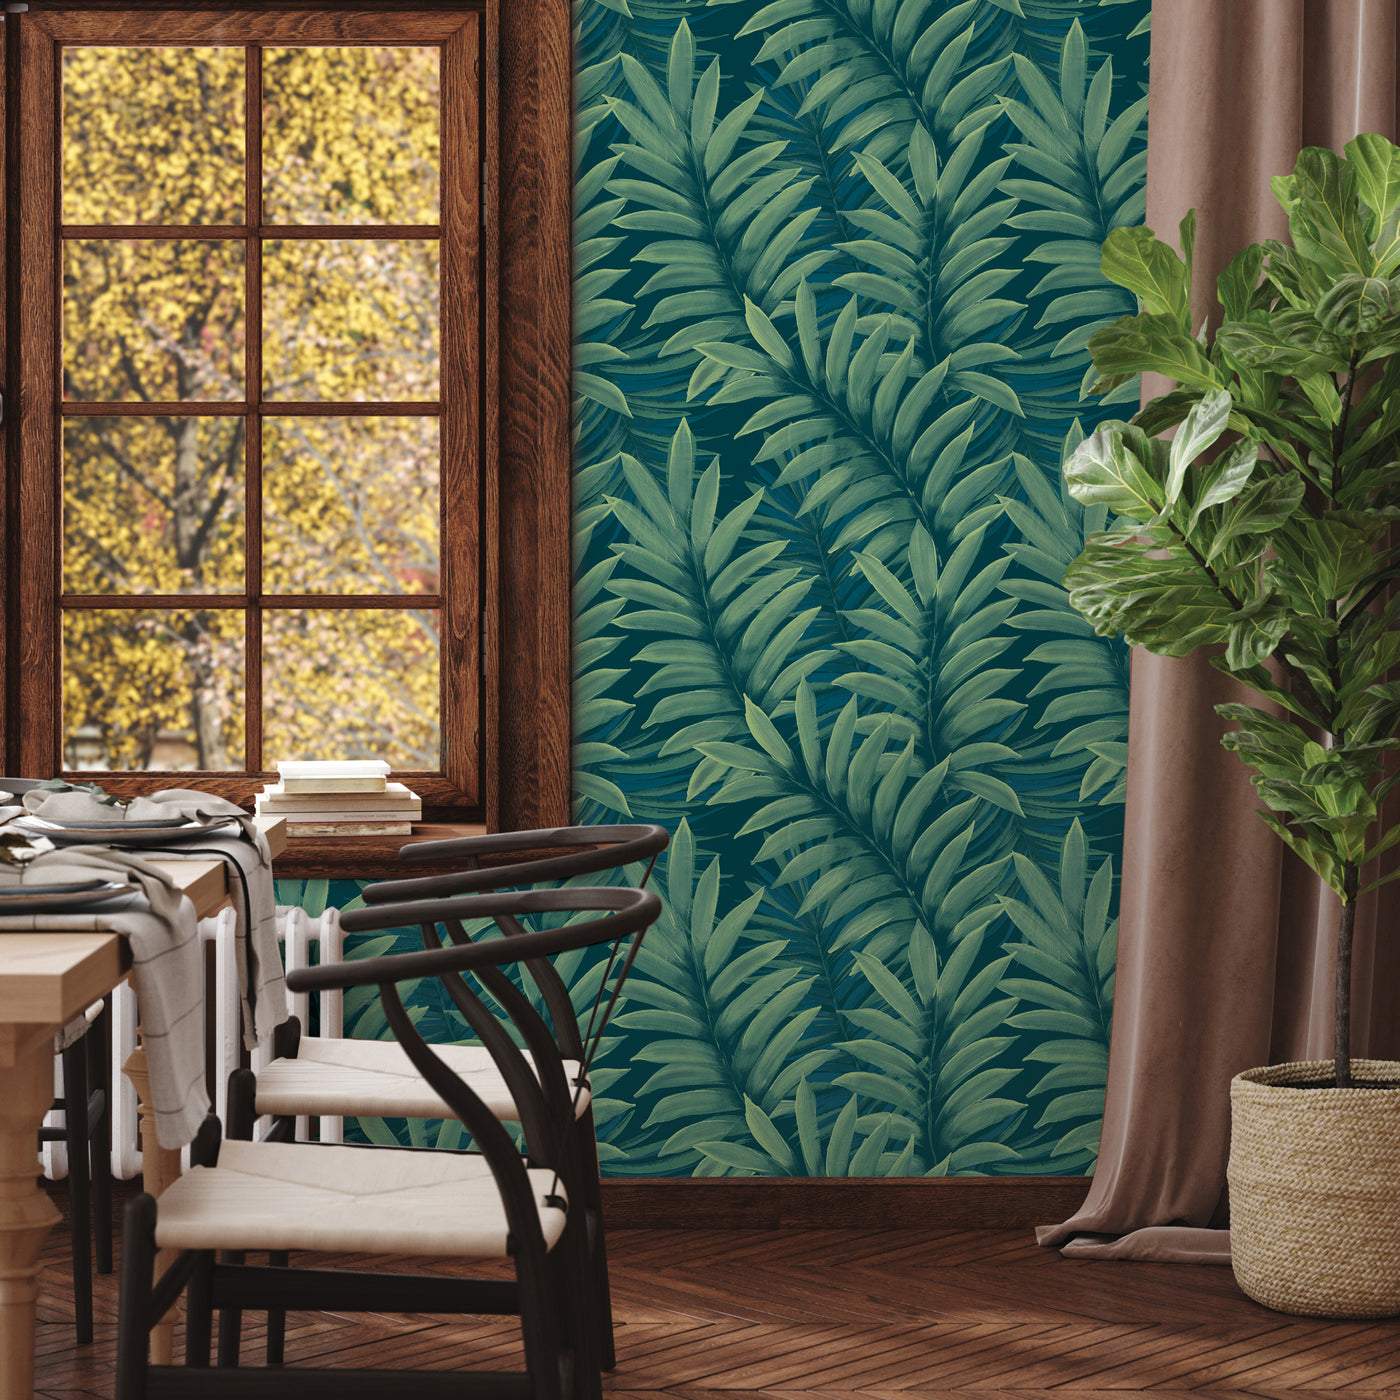 A dining room with a wood table and Tempaper's Palm Leaves Peel And Stick Wall Murals.